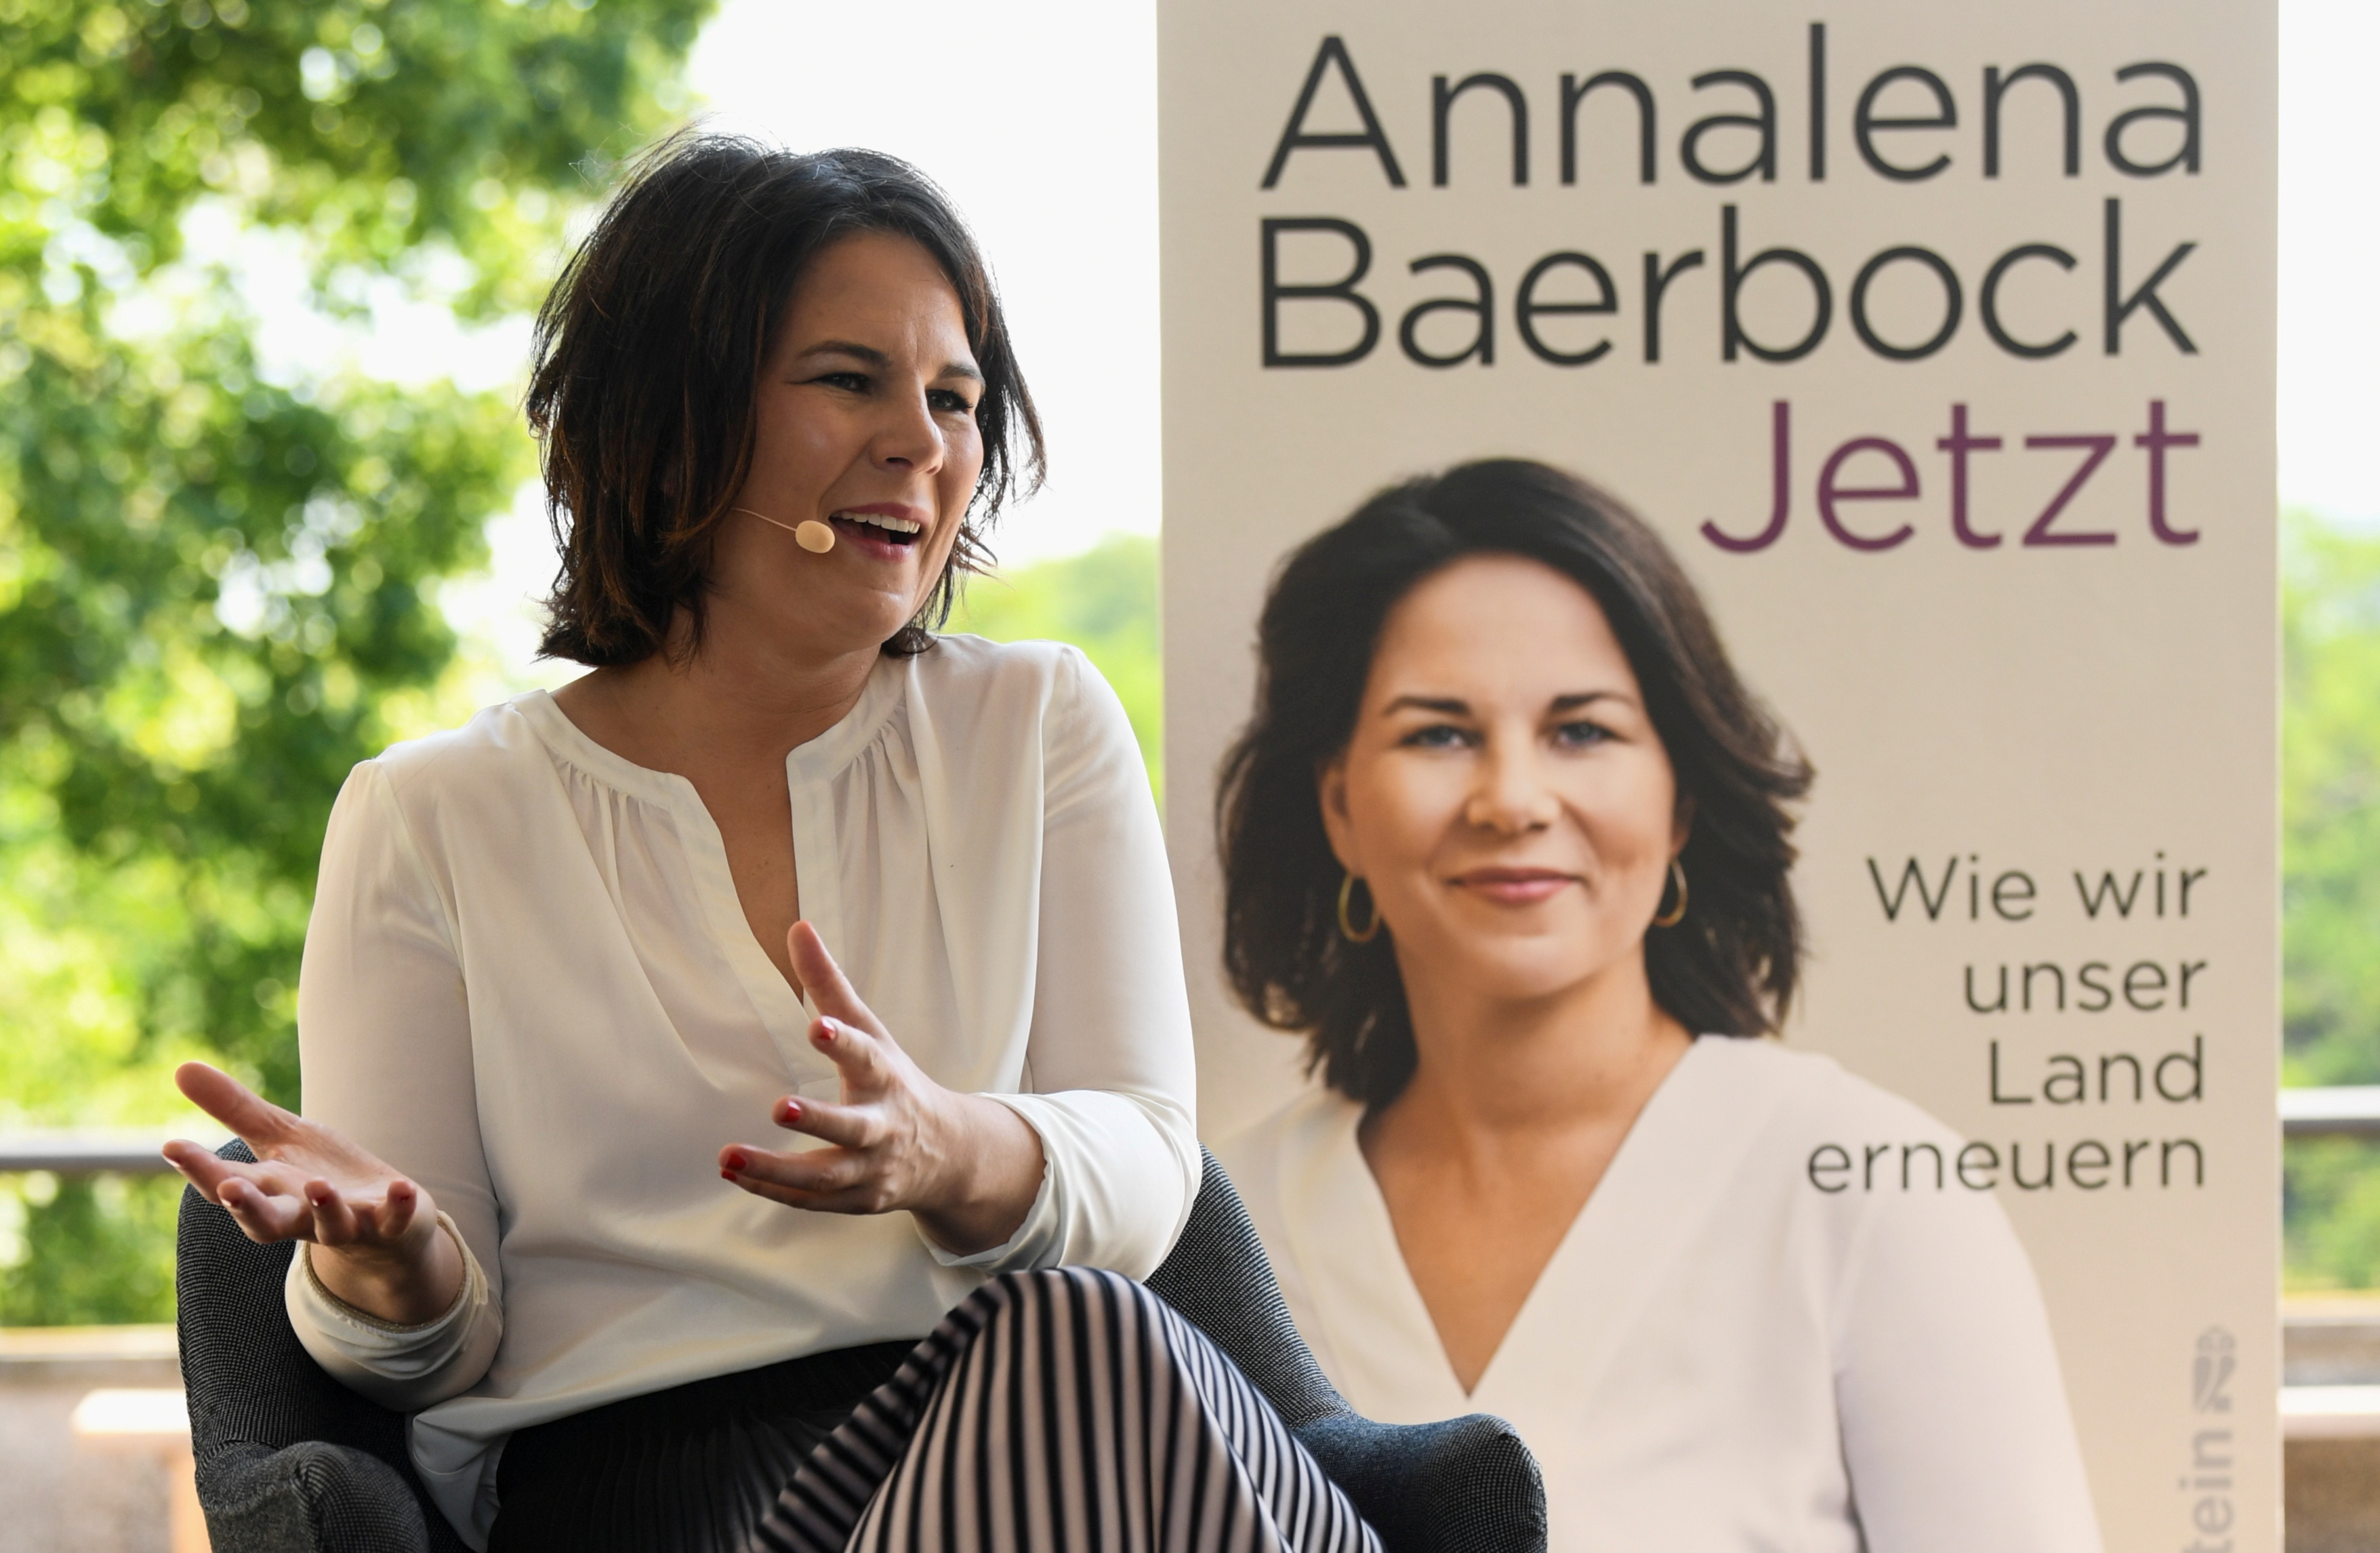 Germany's Green party candidate for chancellor Baerbock presents her book 